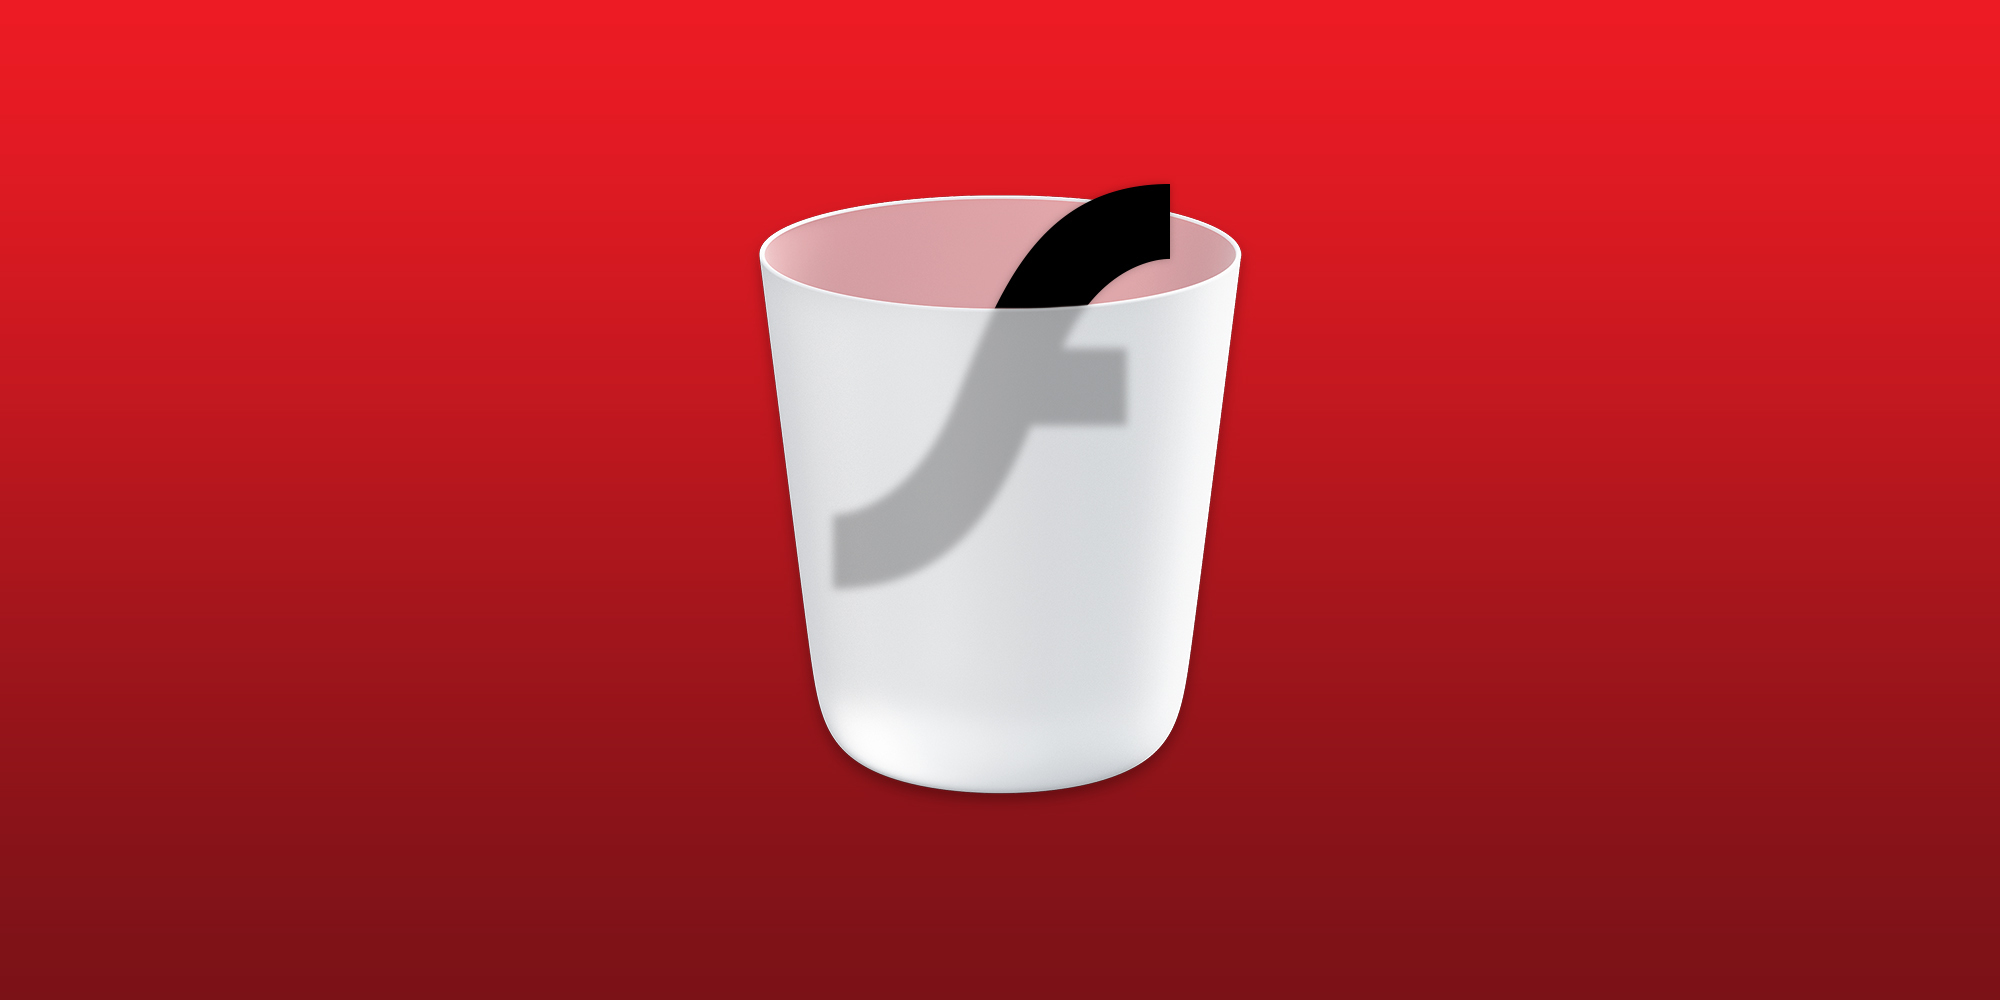 Adobe Flash Player For Apple Ipad 2 Free Download